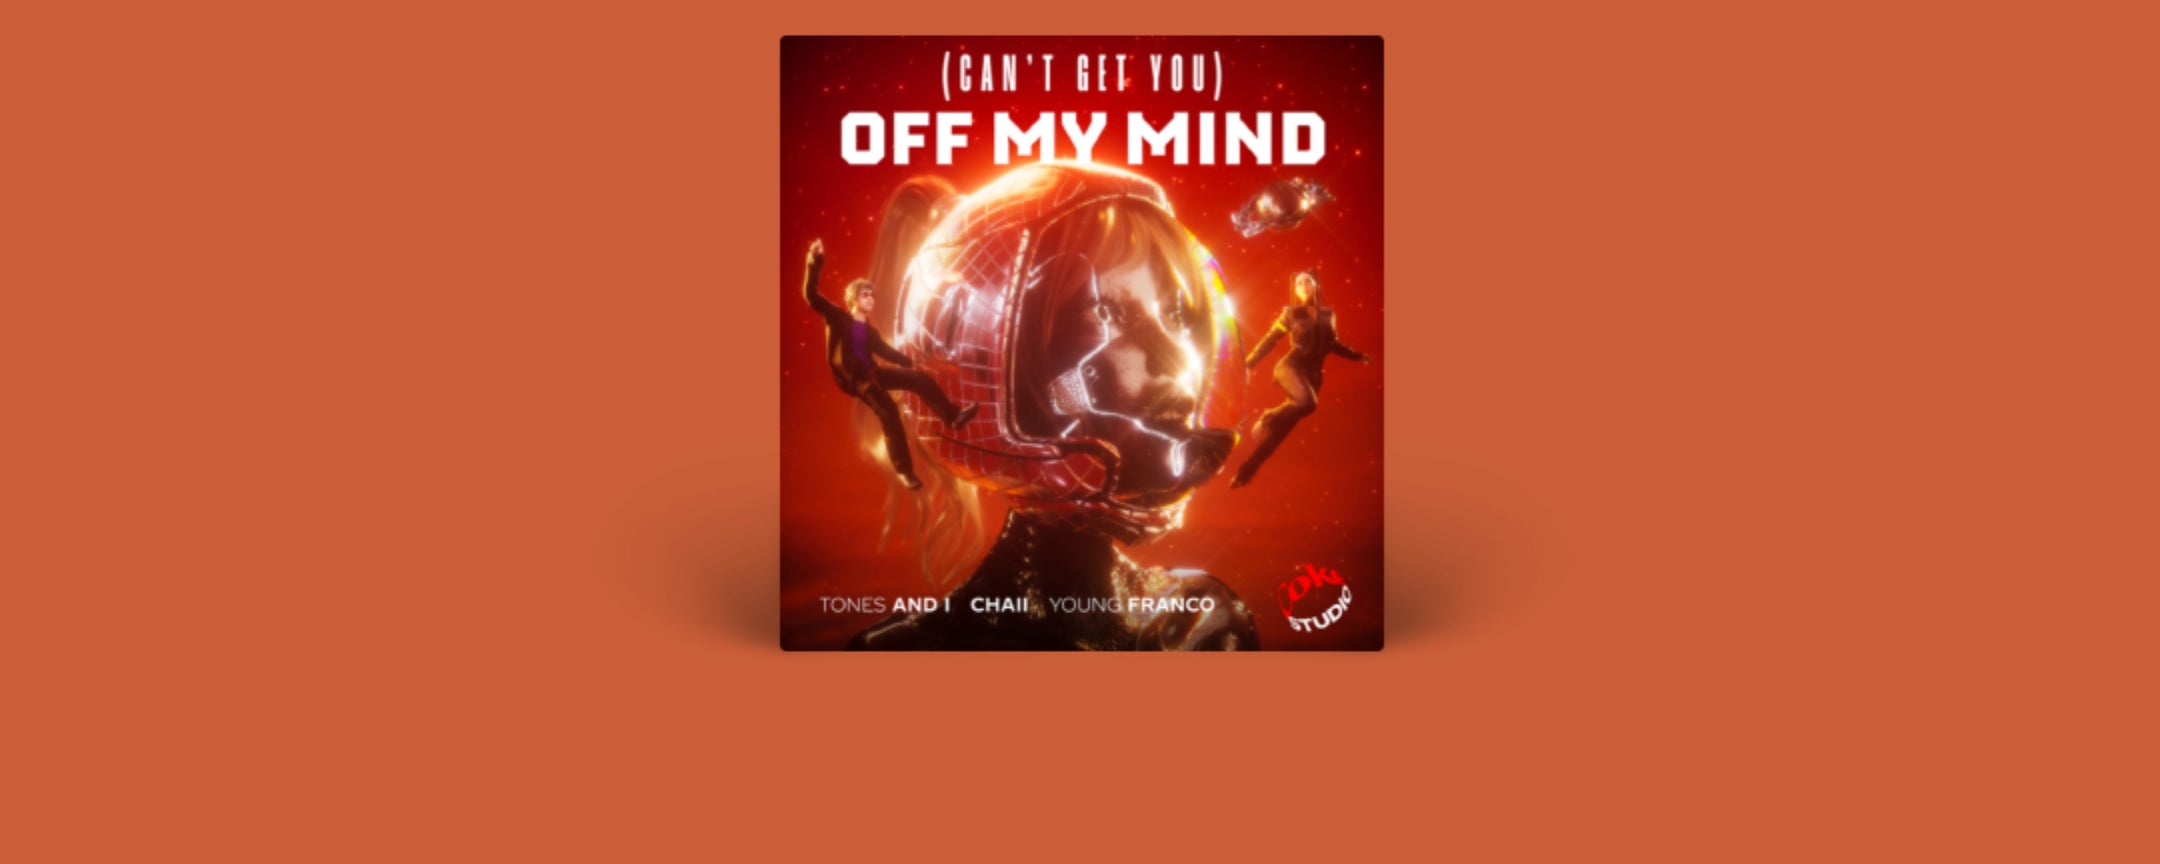 (Can't Get You) Off My Mind